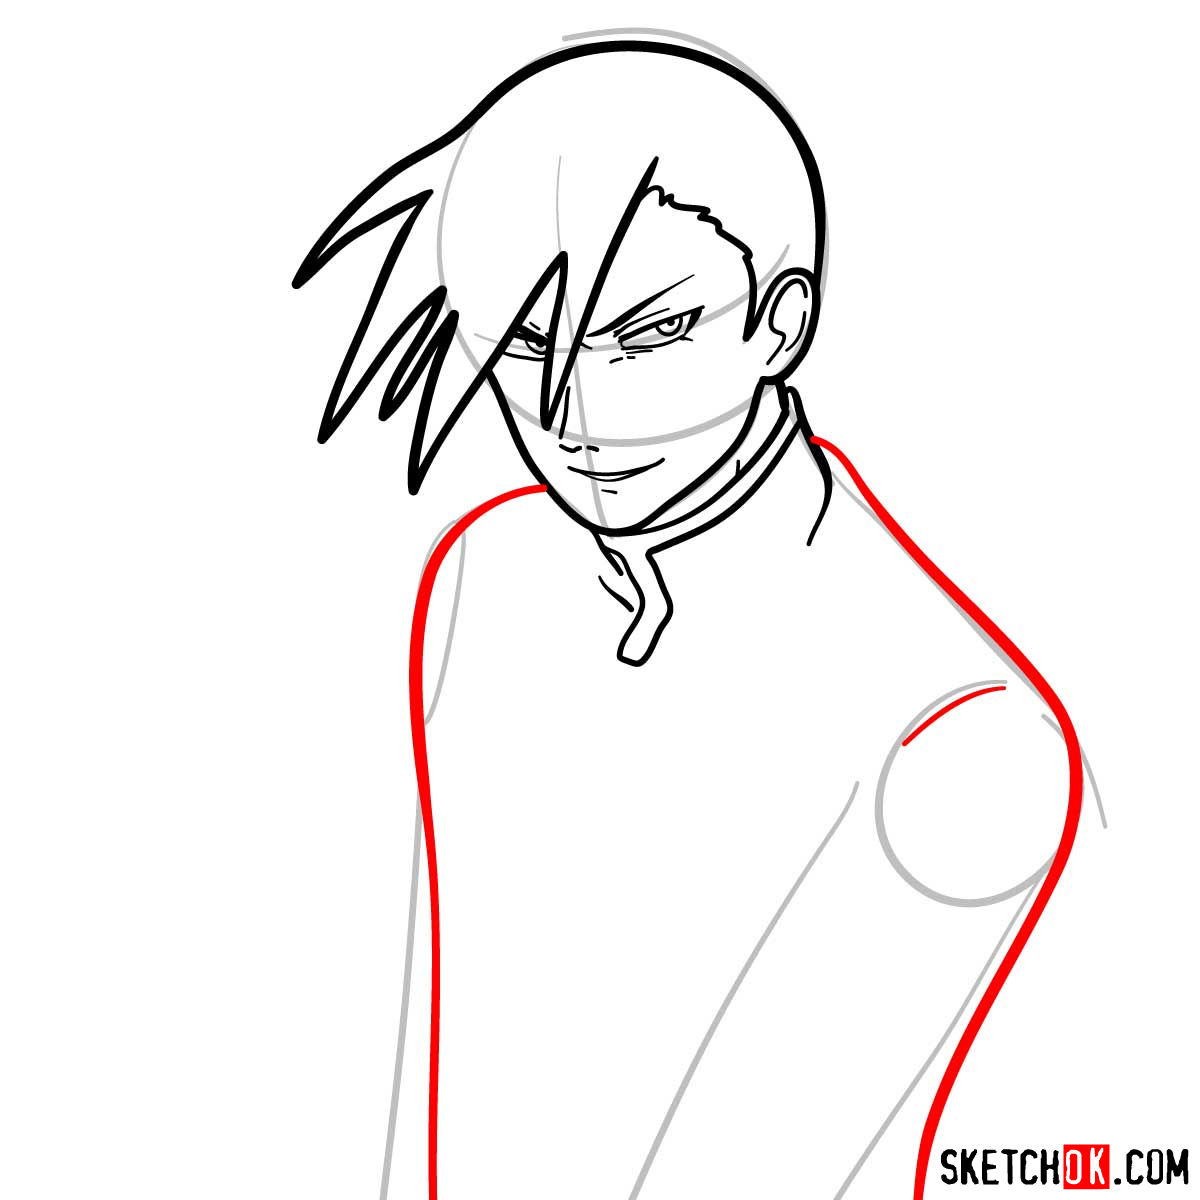 How to draw Greed from Fullmetal Alchemist anime - step 08